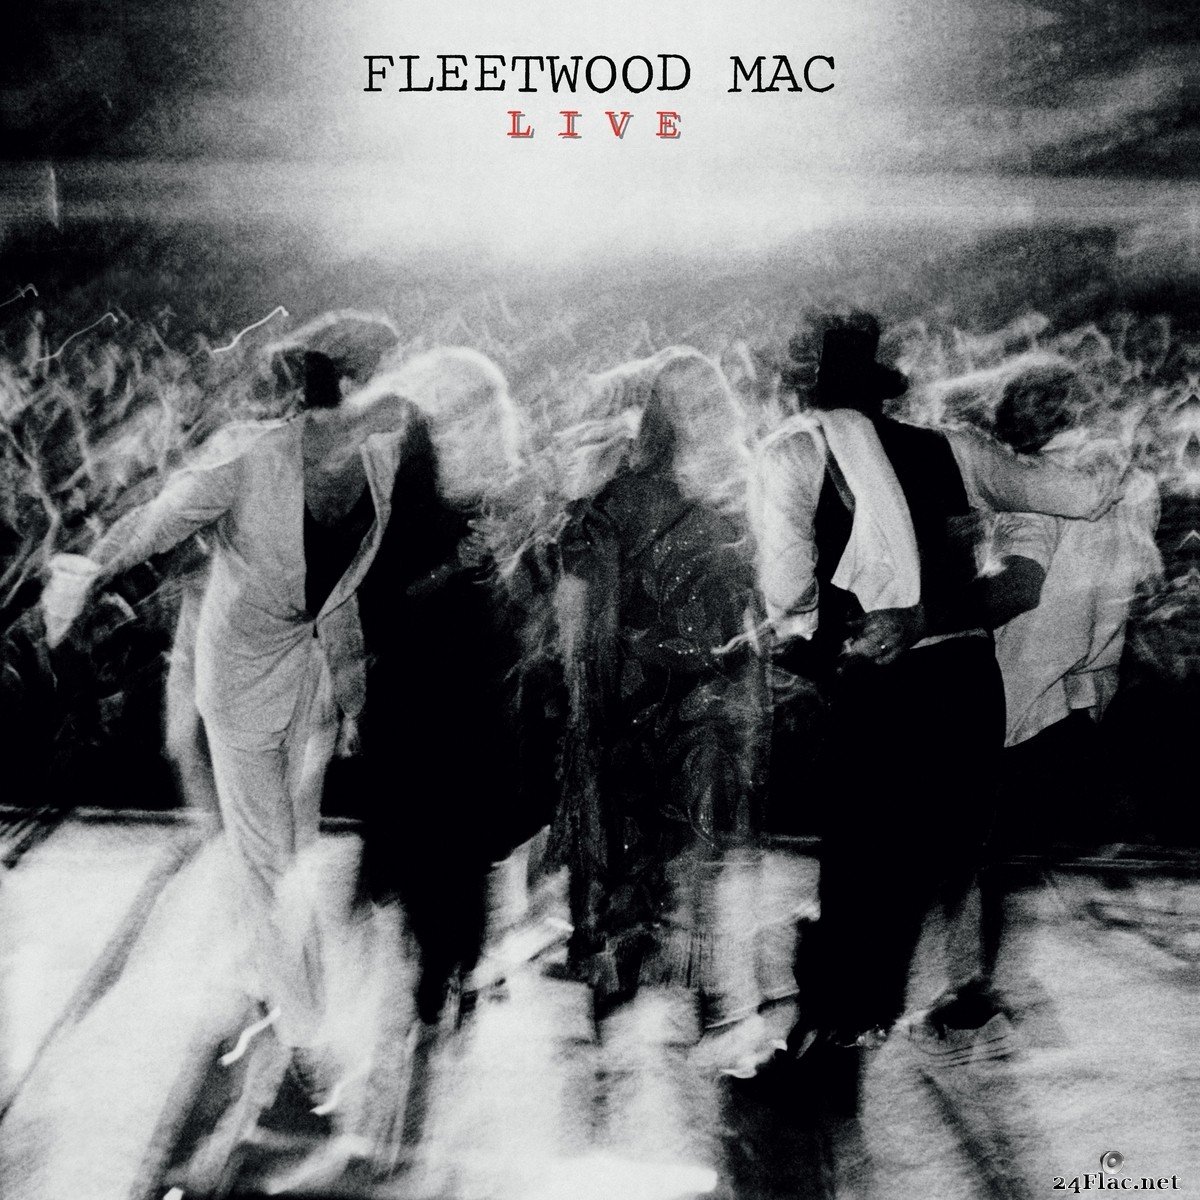 Fleetwood Mac - Live (Deluxe Edition) (2021) FLAC